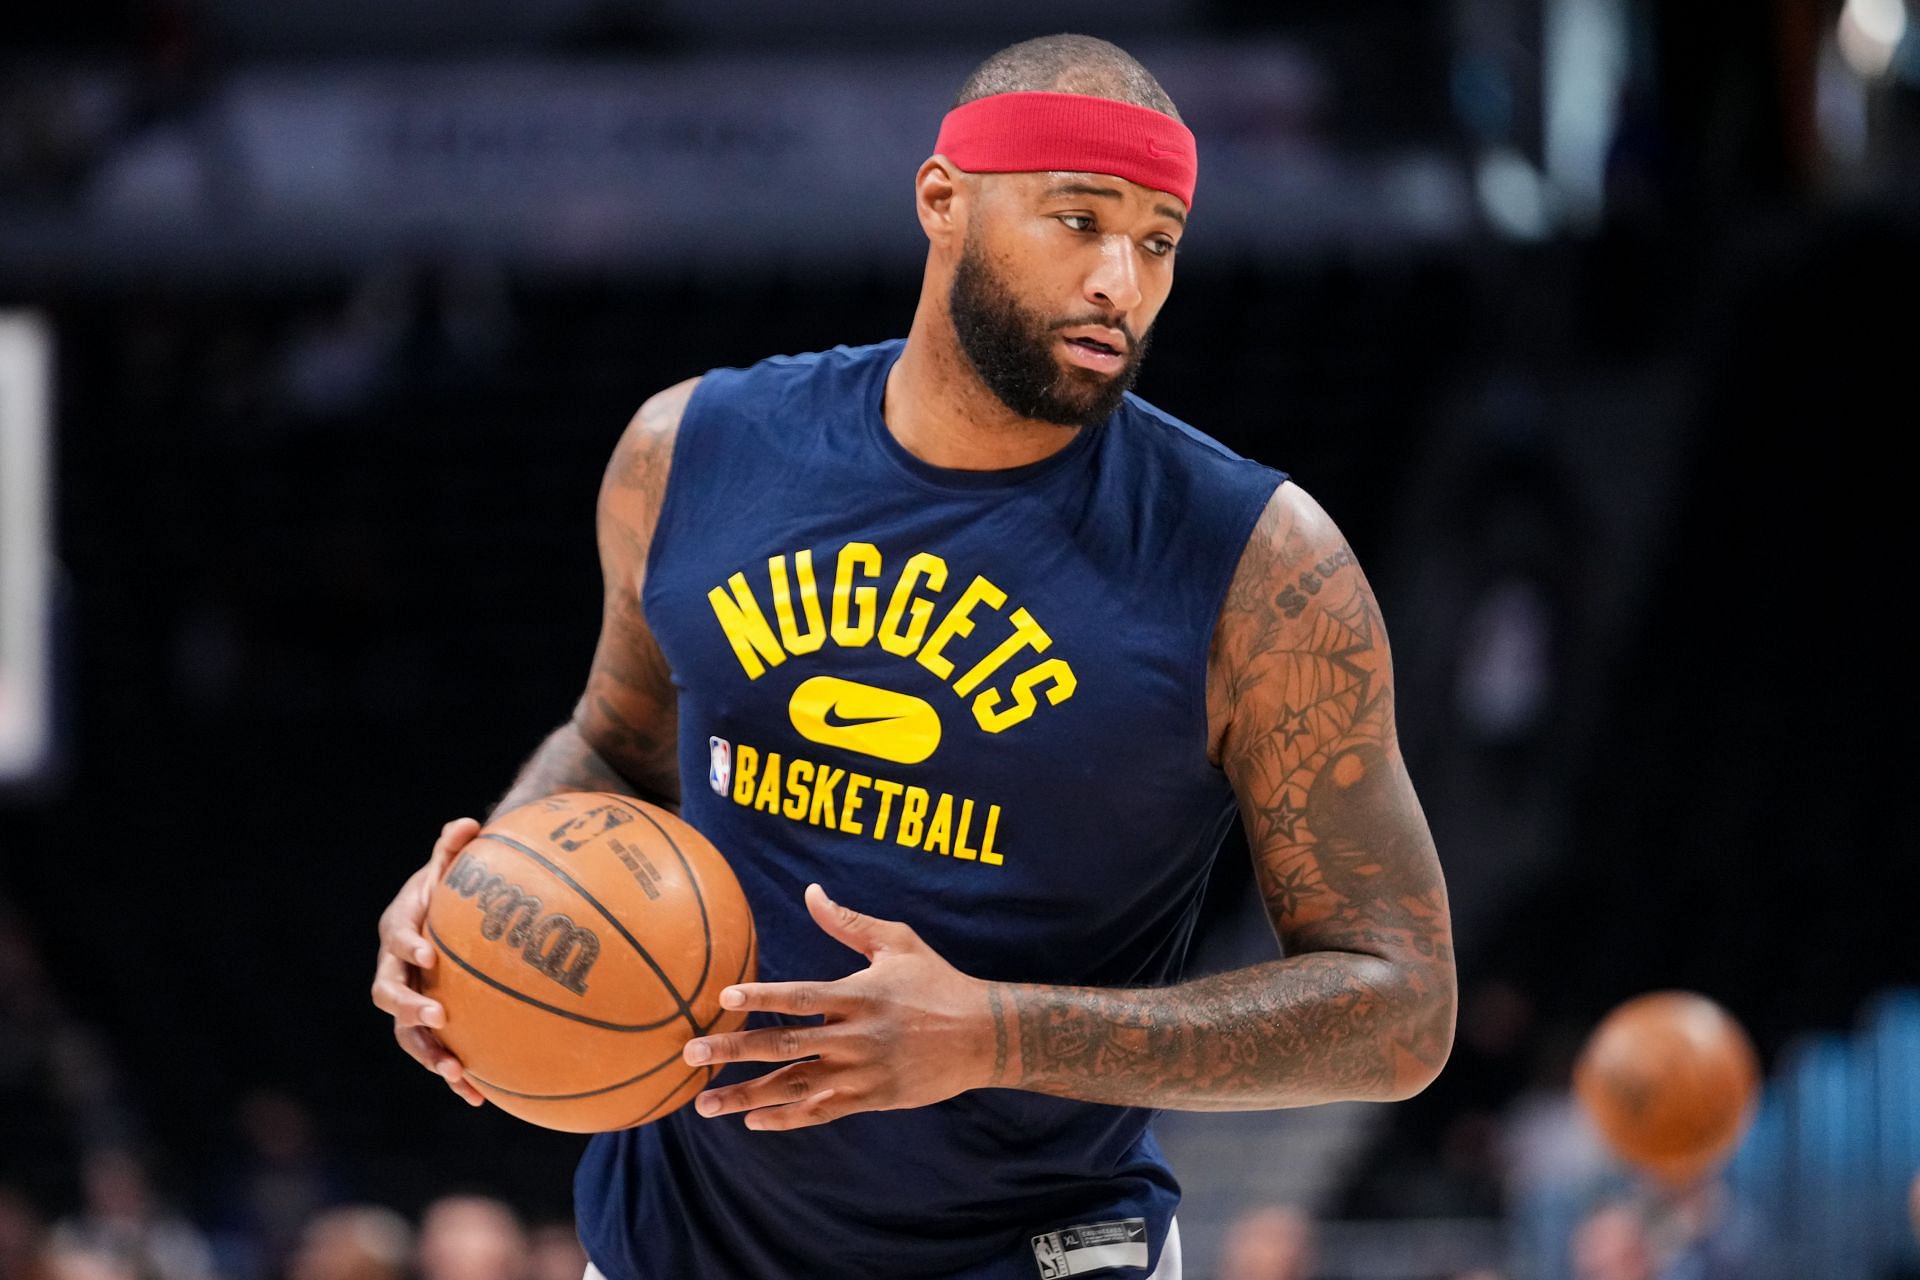 DeMarcus Cousins last played for the Denver Nuggets.